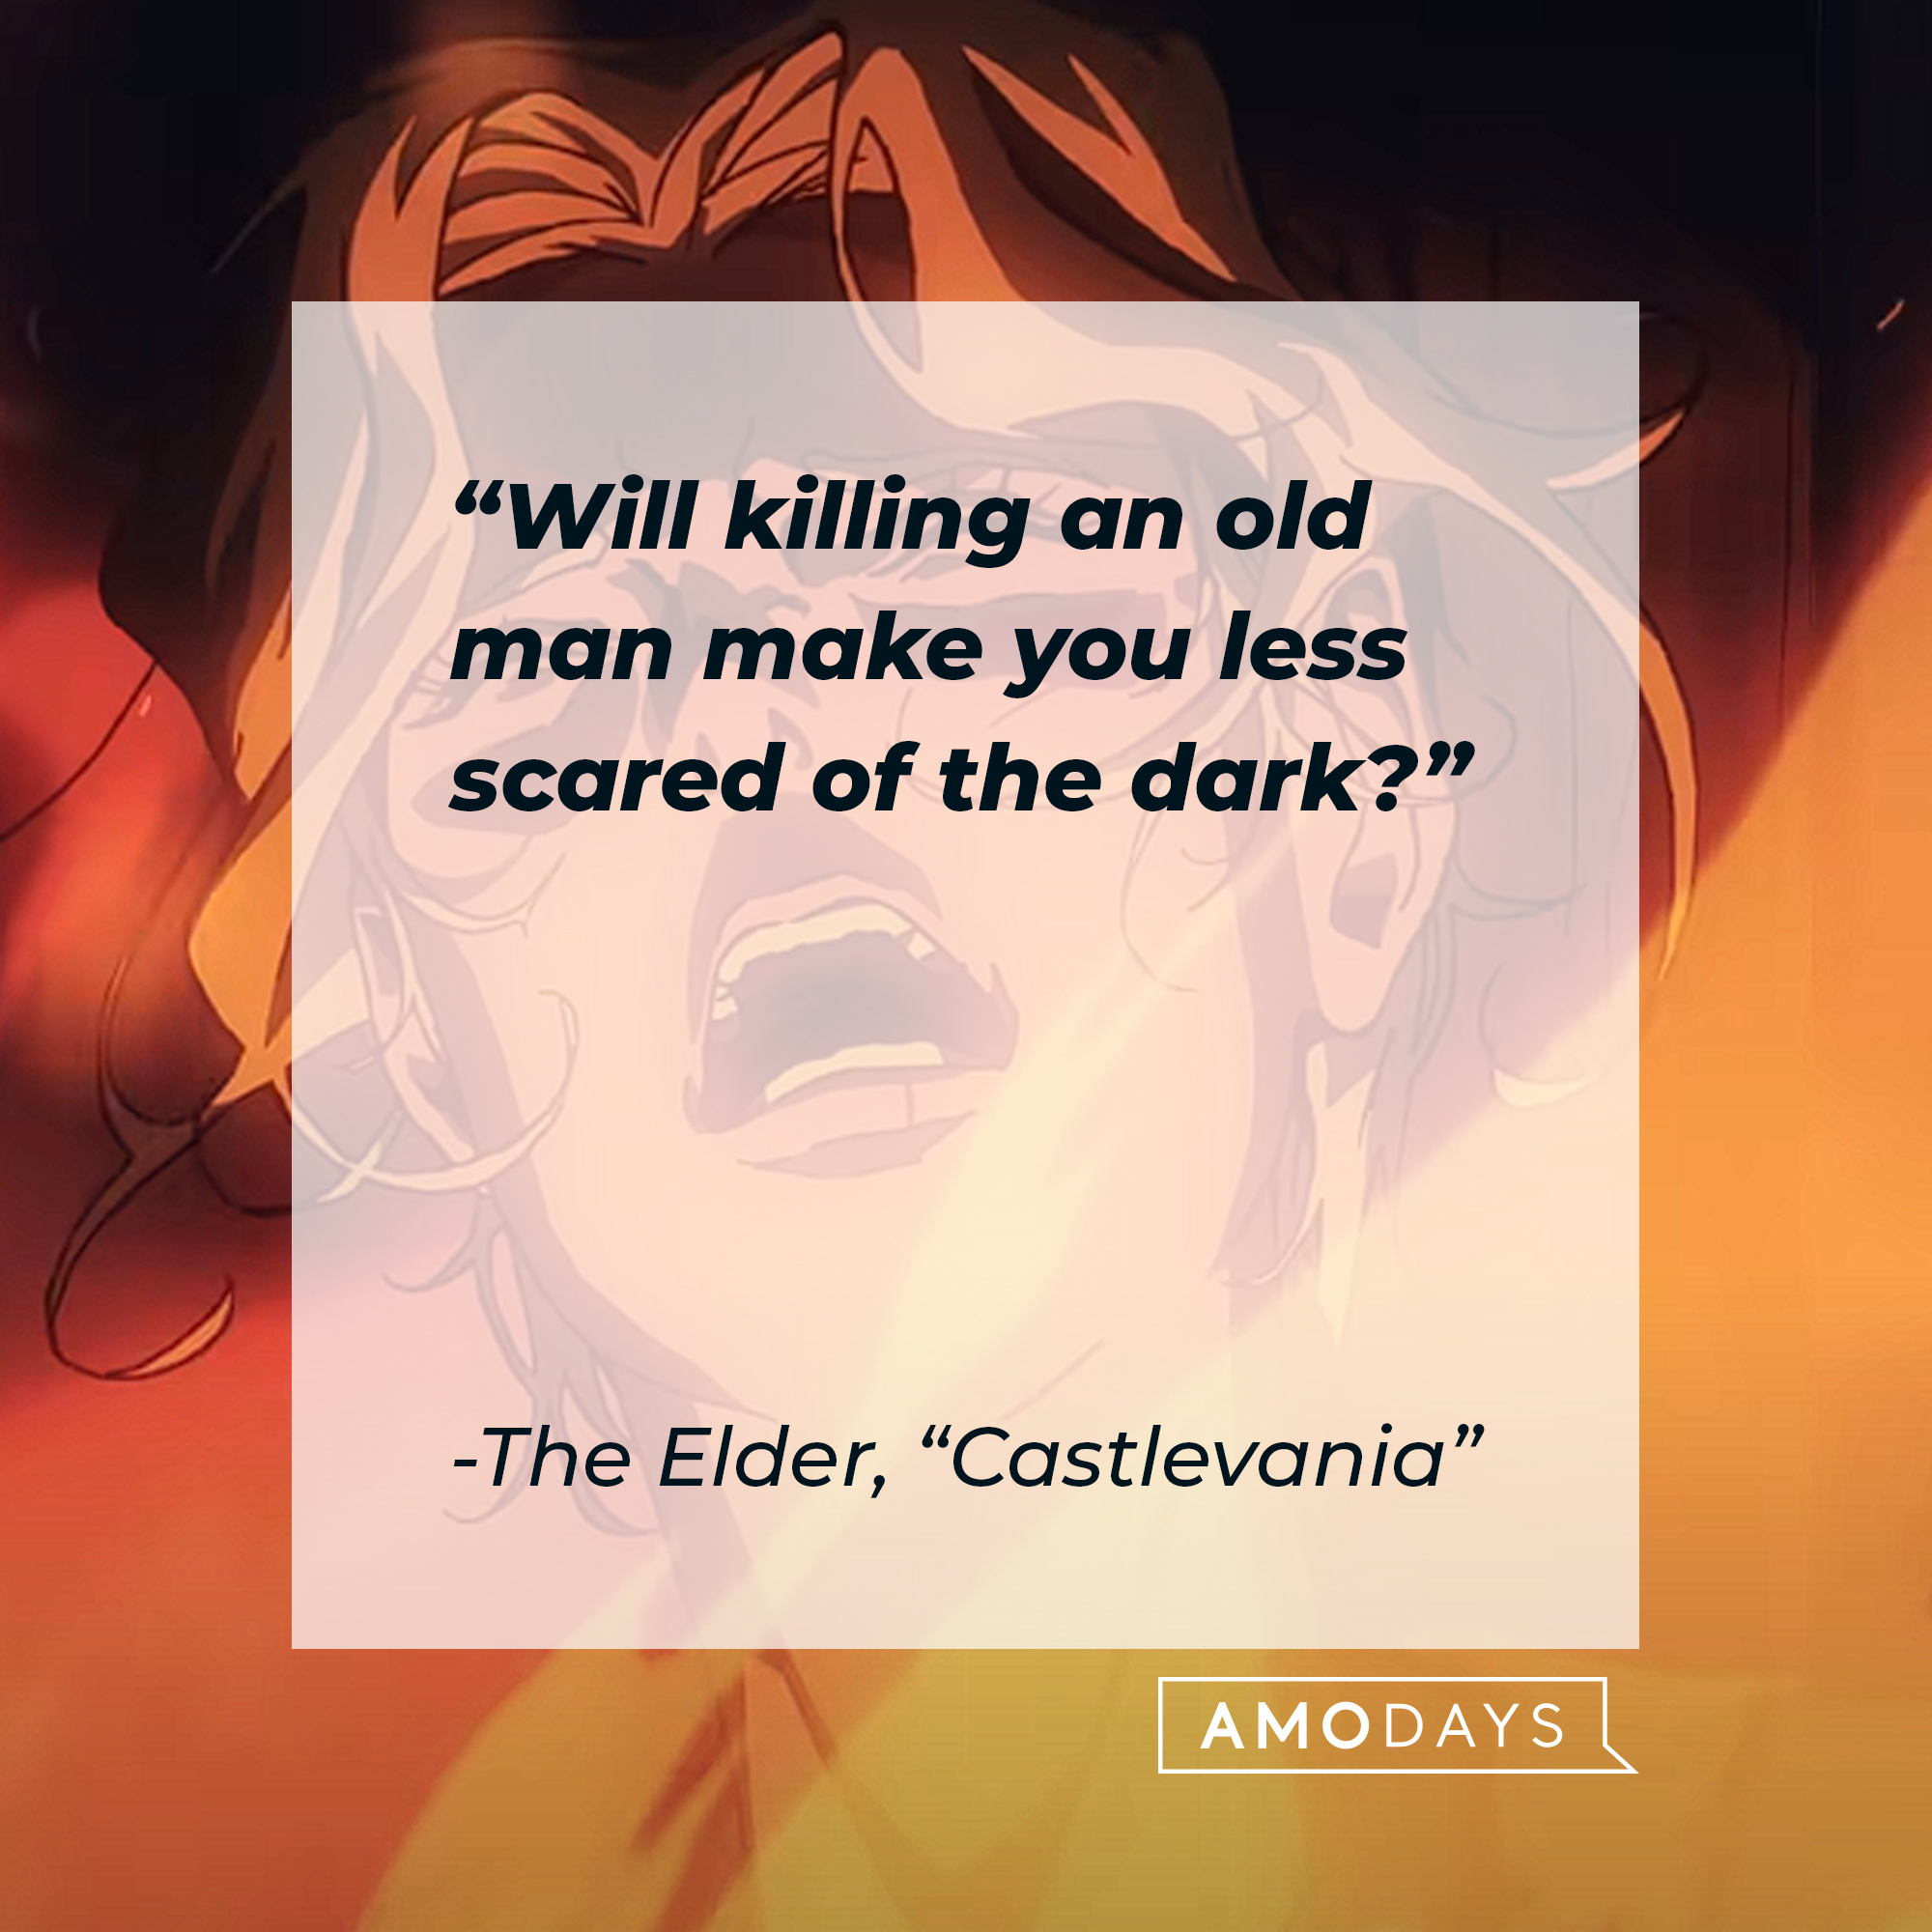 The Elder's quote from "Castlevania:" “Will killing an old man make you less scared of the dark?” | Source: Youtube.com/Netflix